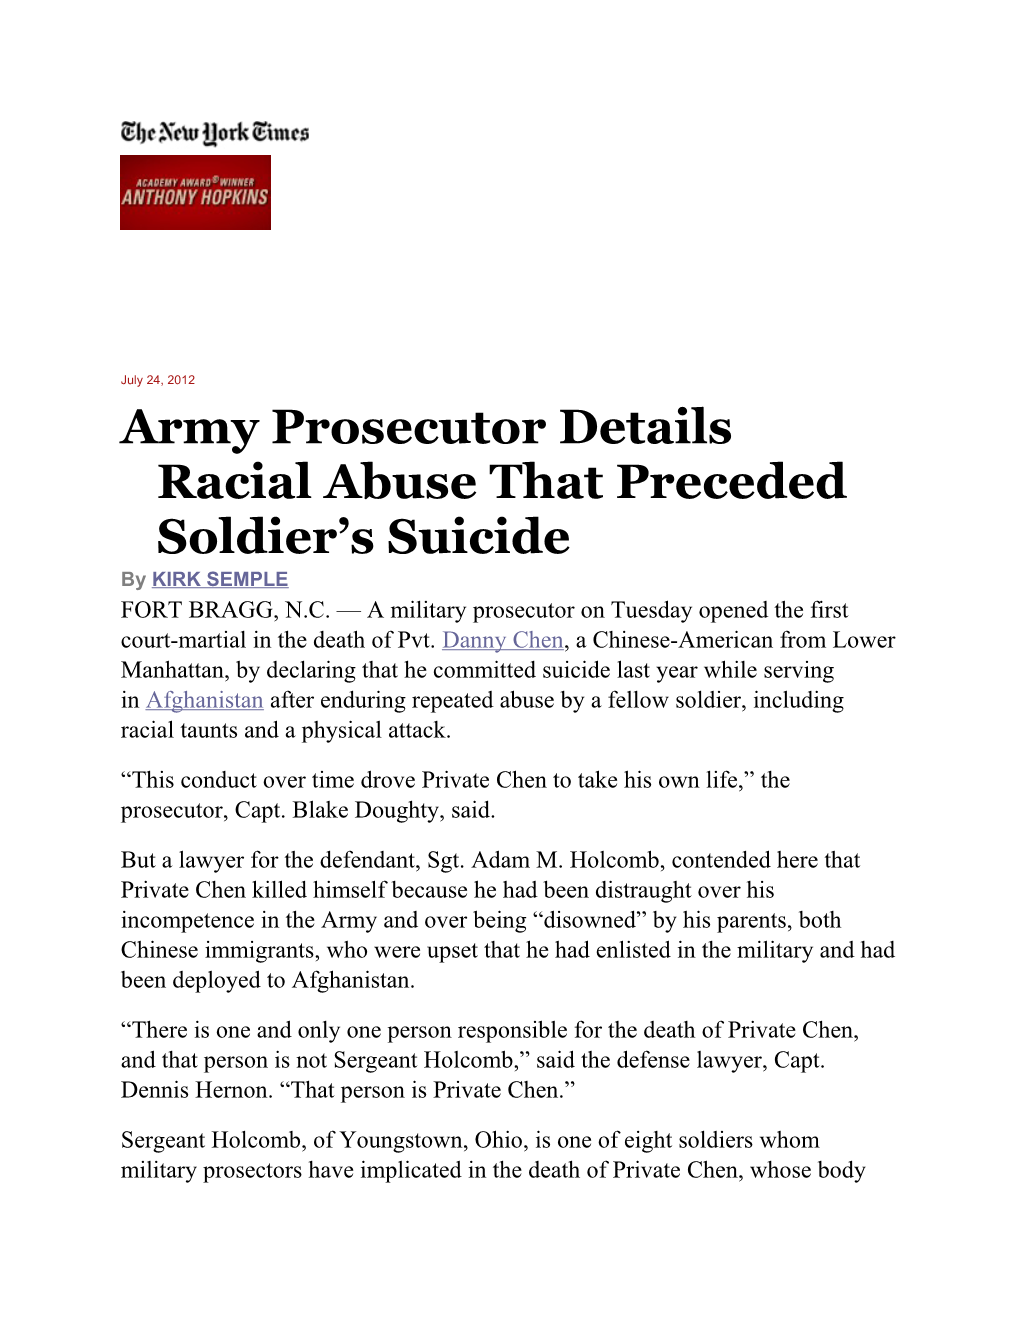 Army Prosecutor Details Racial Abuse That Preceded Soldier S Suicide